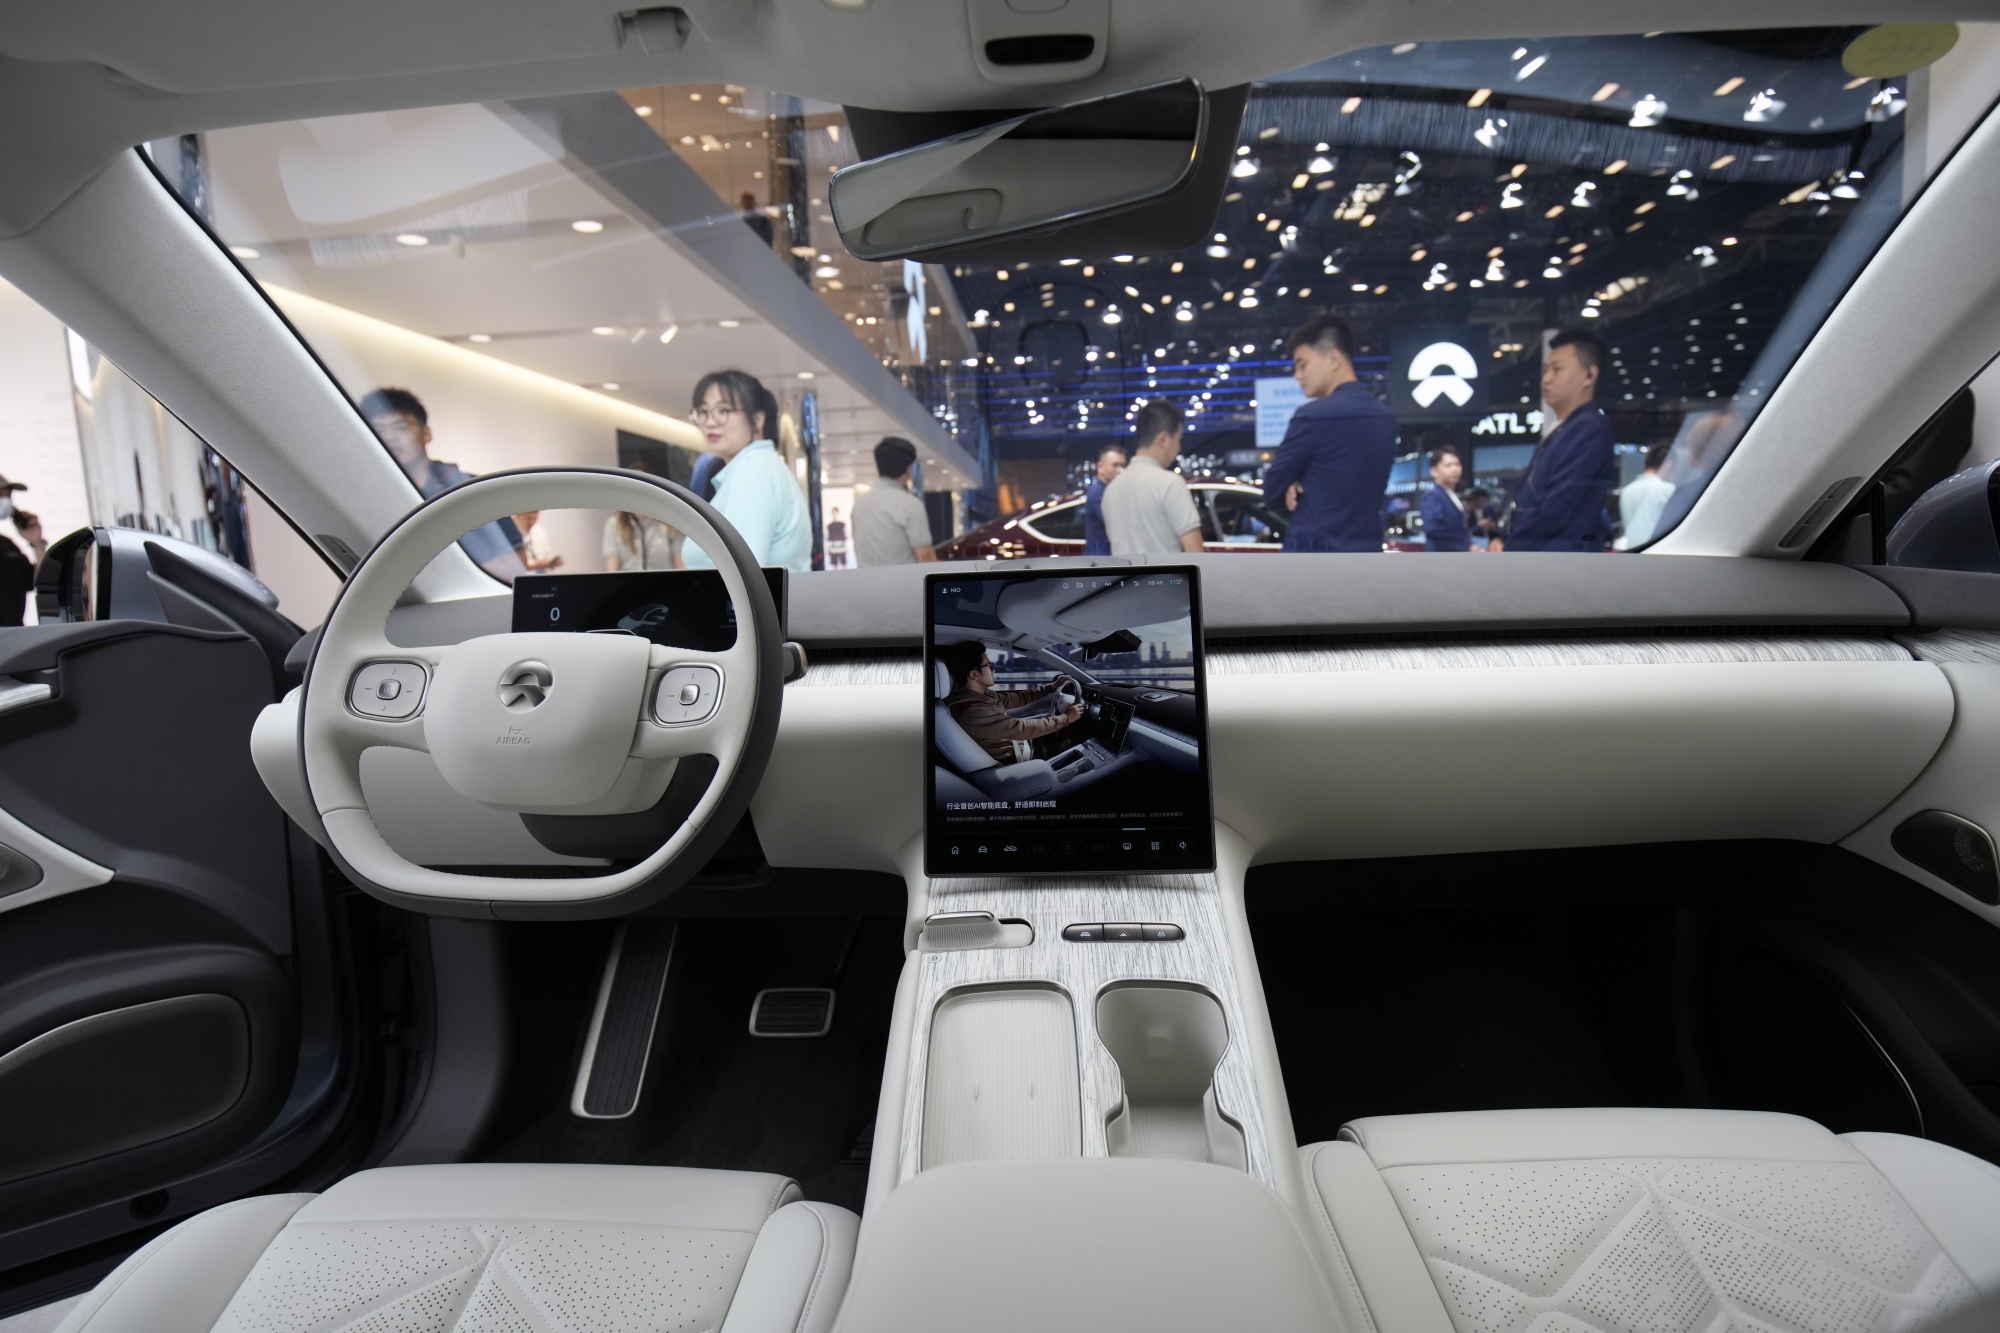 The dashboard of a Nio Inc. ET7 electric vehicle during the Beijing Auto Show in Beijing, China, on&nbsp;April 26.